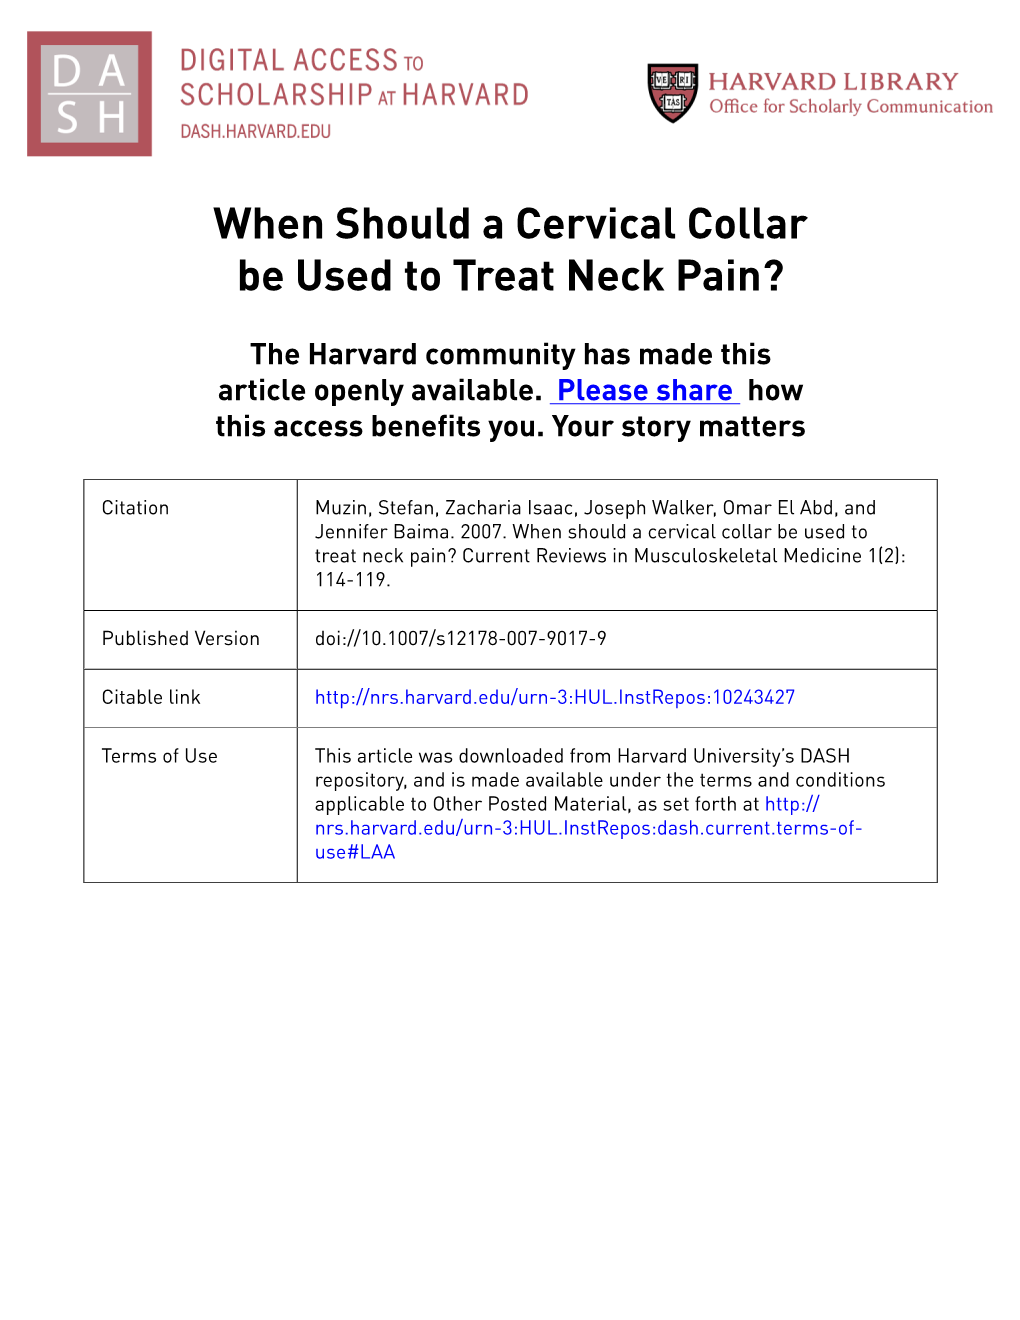 When Should a Cervical Collar Be Used to Treat Neck Pain?